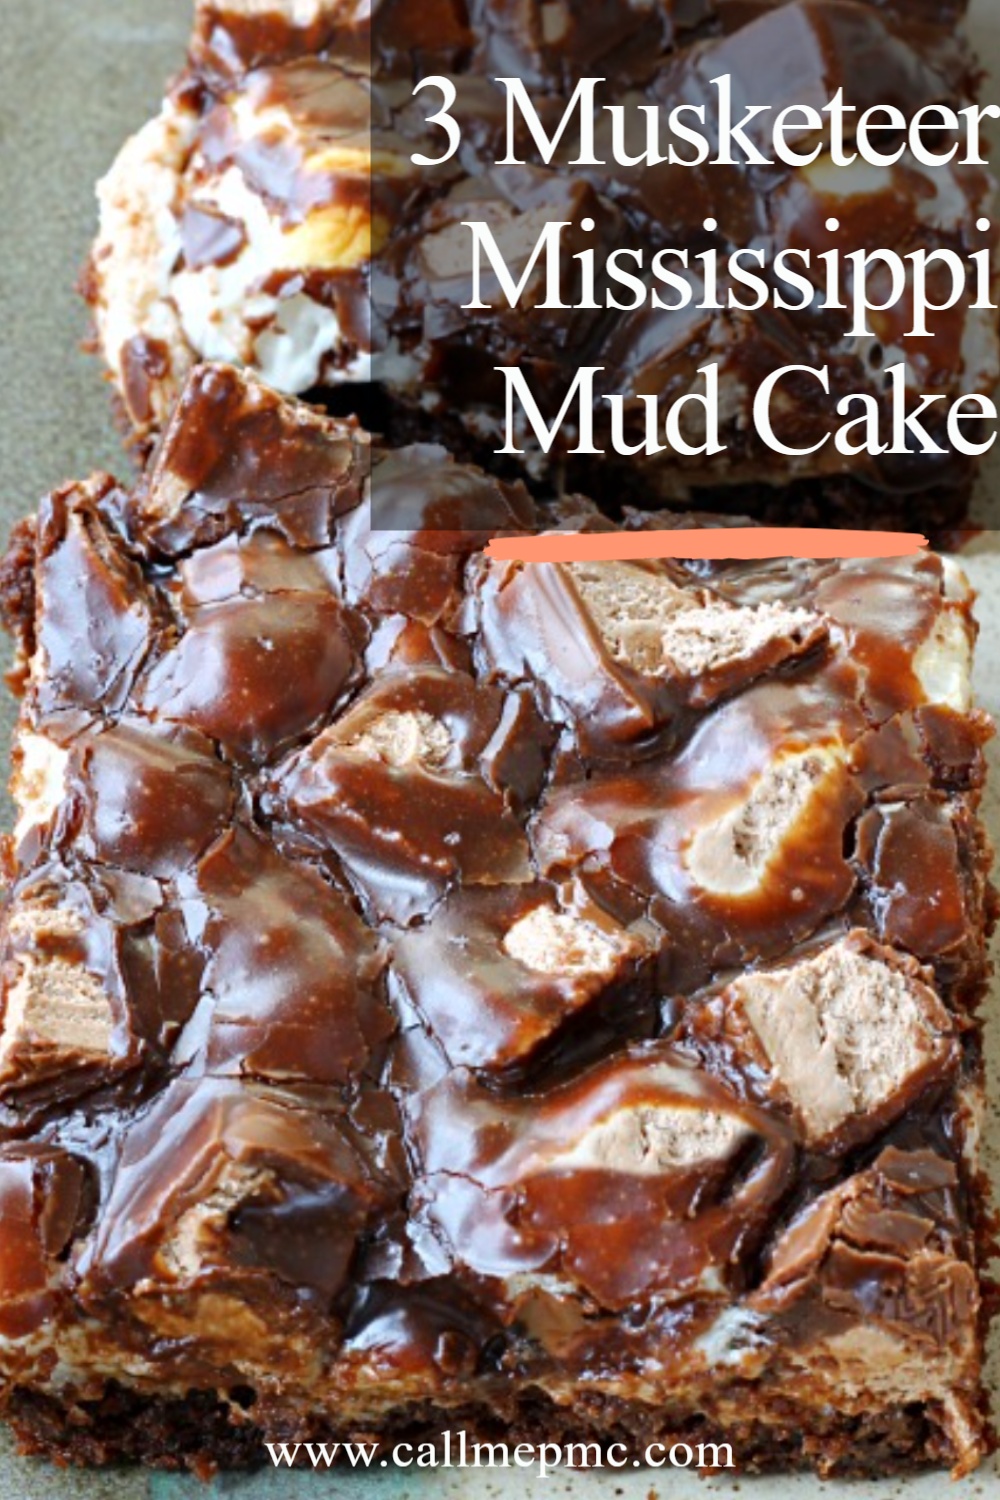 Indulge in the irresistible decadence of a 3 Musketeer Mississippi Mud Cake.